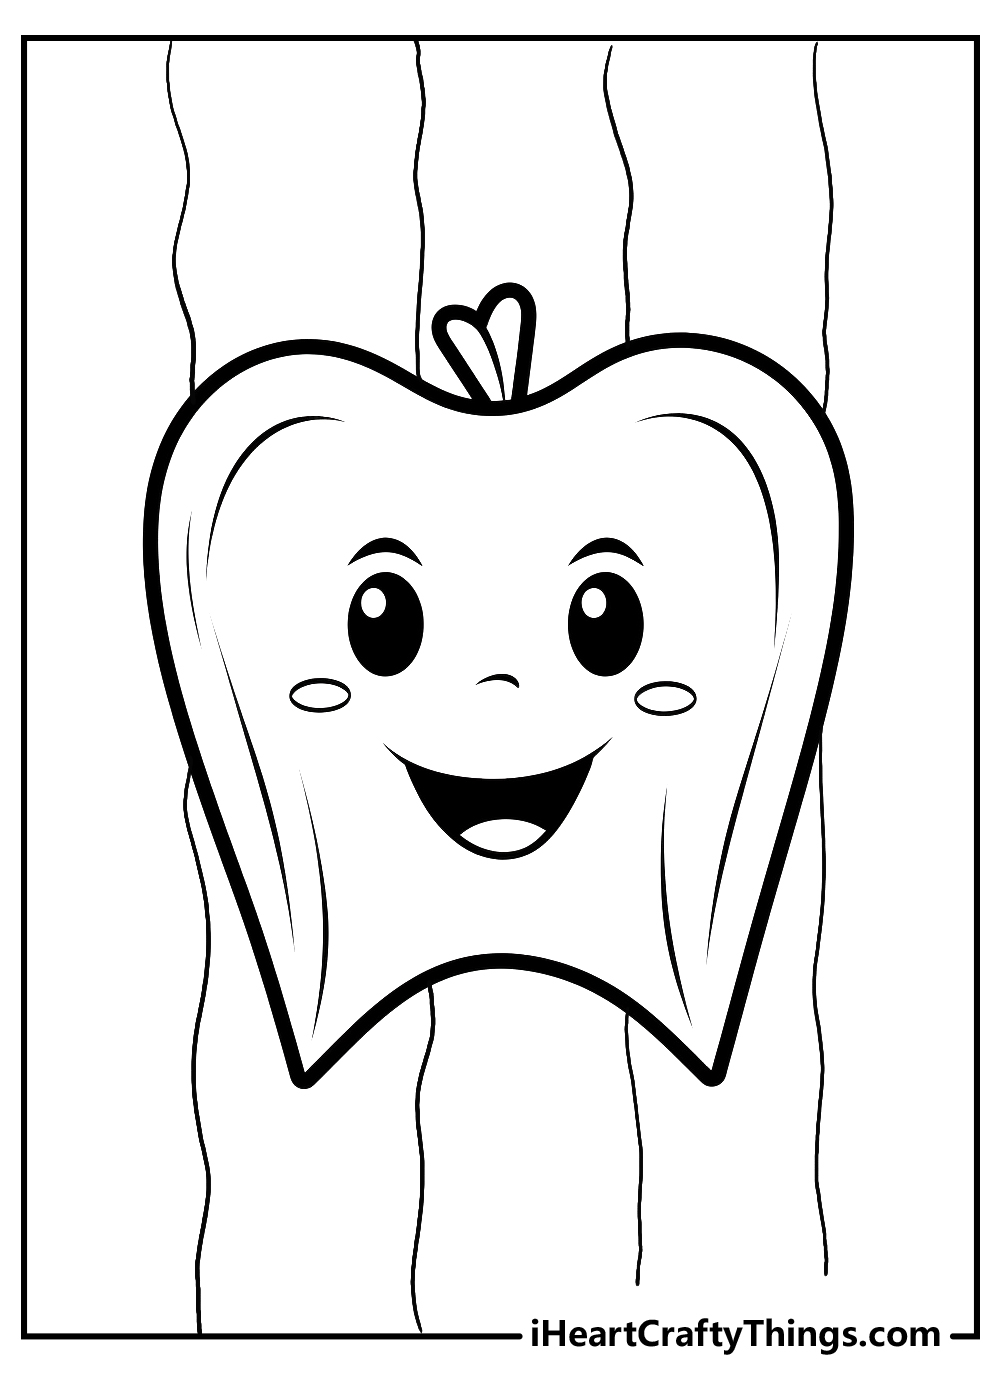 tooth coloring sheet free download